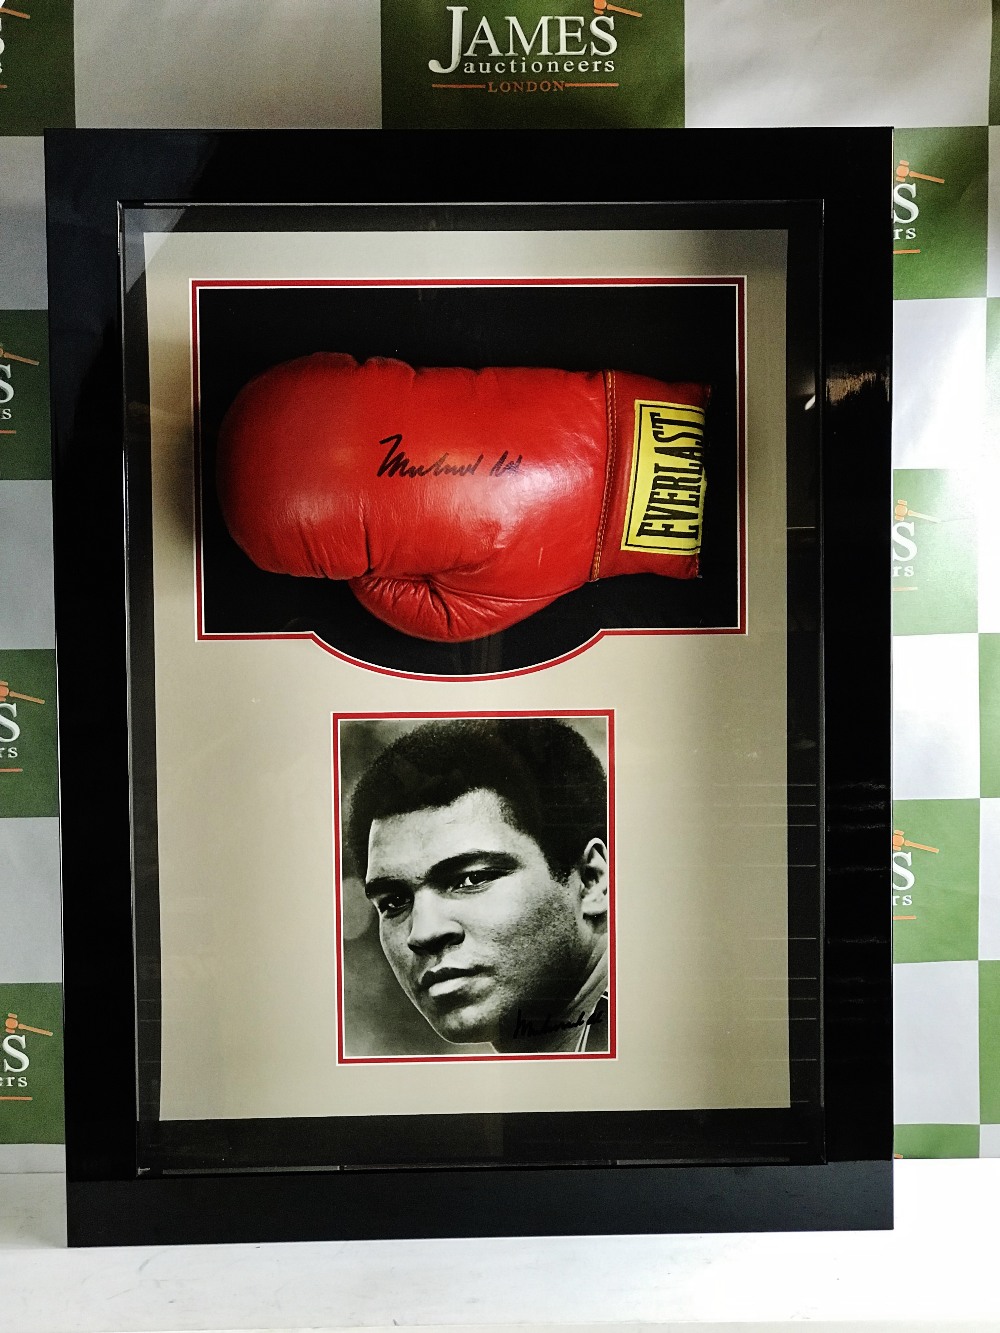 Muhammad Ali Signed Everlast Boxing Glove & Signed Picture - Image 4 of 4